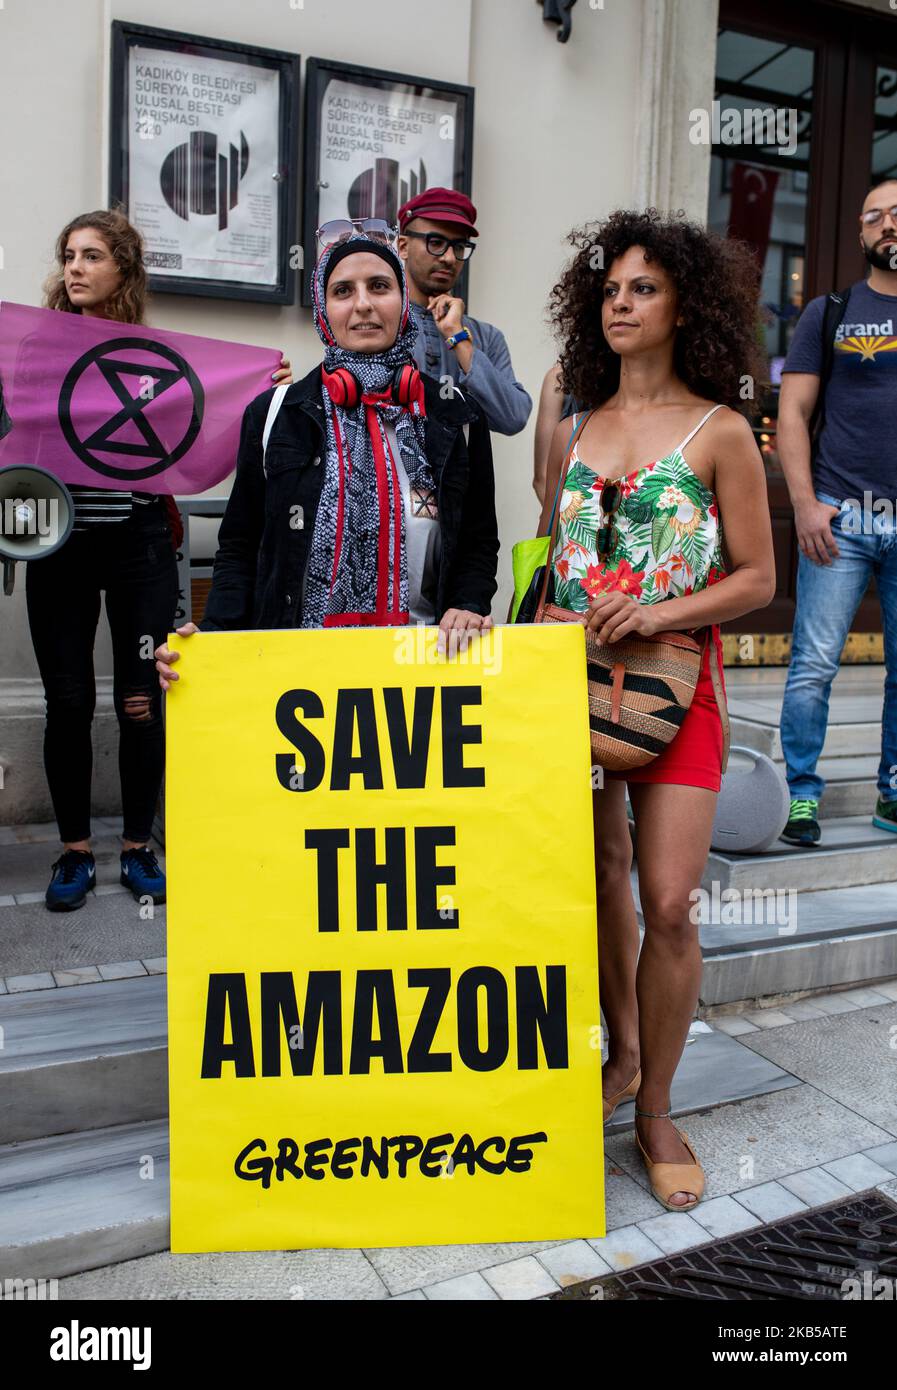 The fire in the Amazon rainforest lead to worldwide protests over Brazilian government inaction. On September 5, 2019, several environmentalist organizations made a call for a demonstration in Istanbul. Their main slogan was ''Take action for the Amazon''. The crowd also carried signs that pointed out the deforestation in Northern Forests in Turkey. (Photo by Erhan Demirtas/NurPhoto) Stock Photo